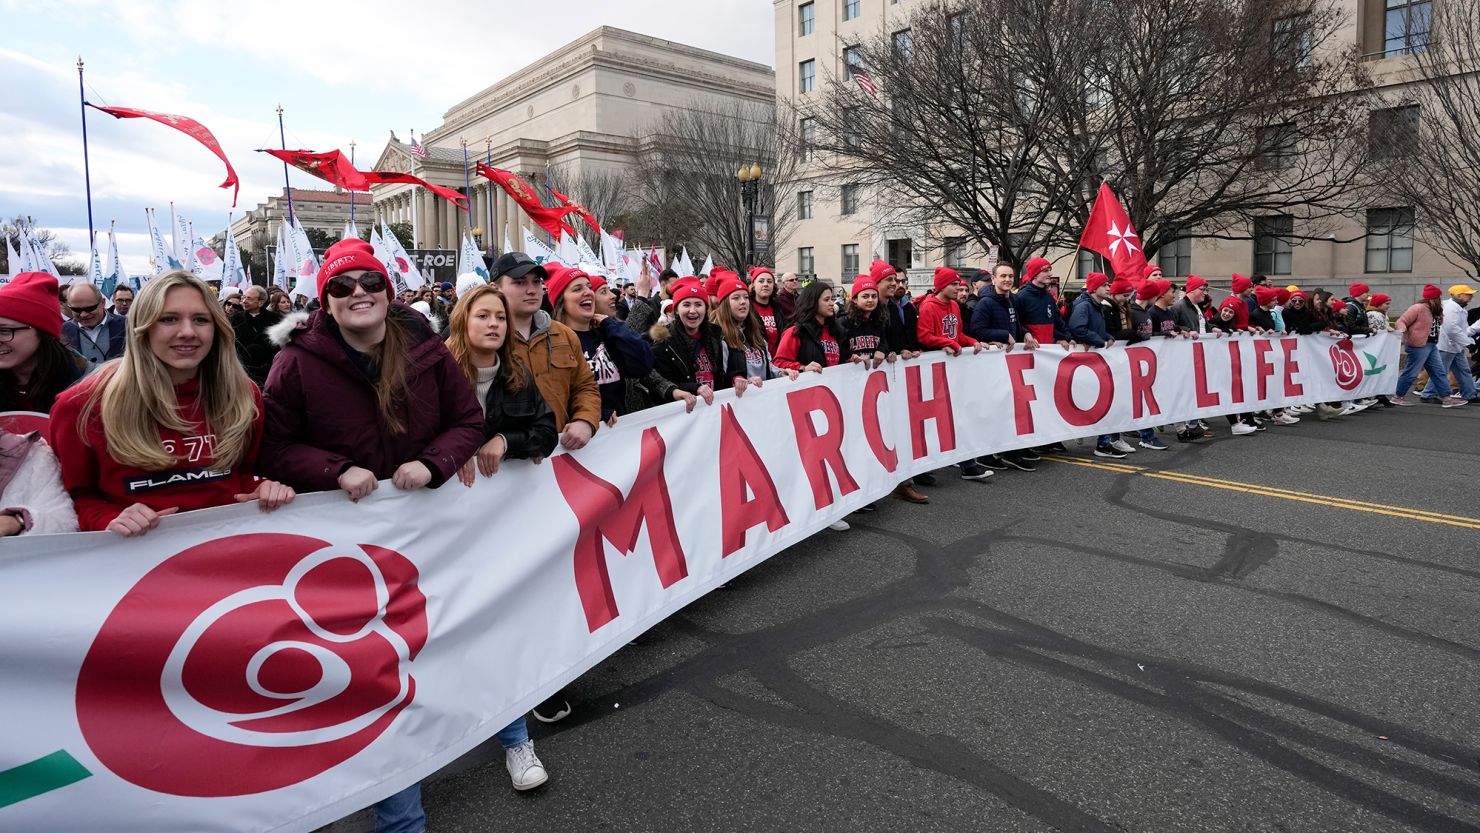 Anti-abortion demonstrators march toward the US Supreme Court during the March for Life on January 20 in Washington, DC.